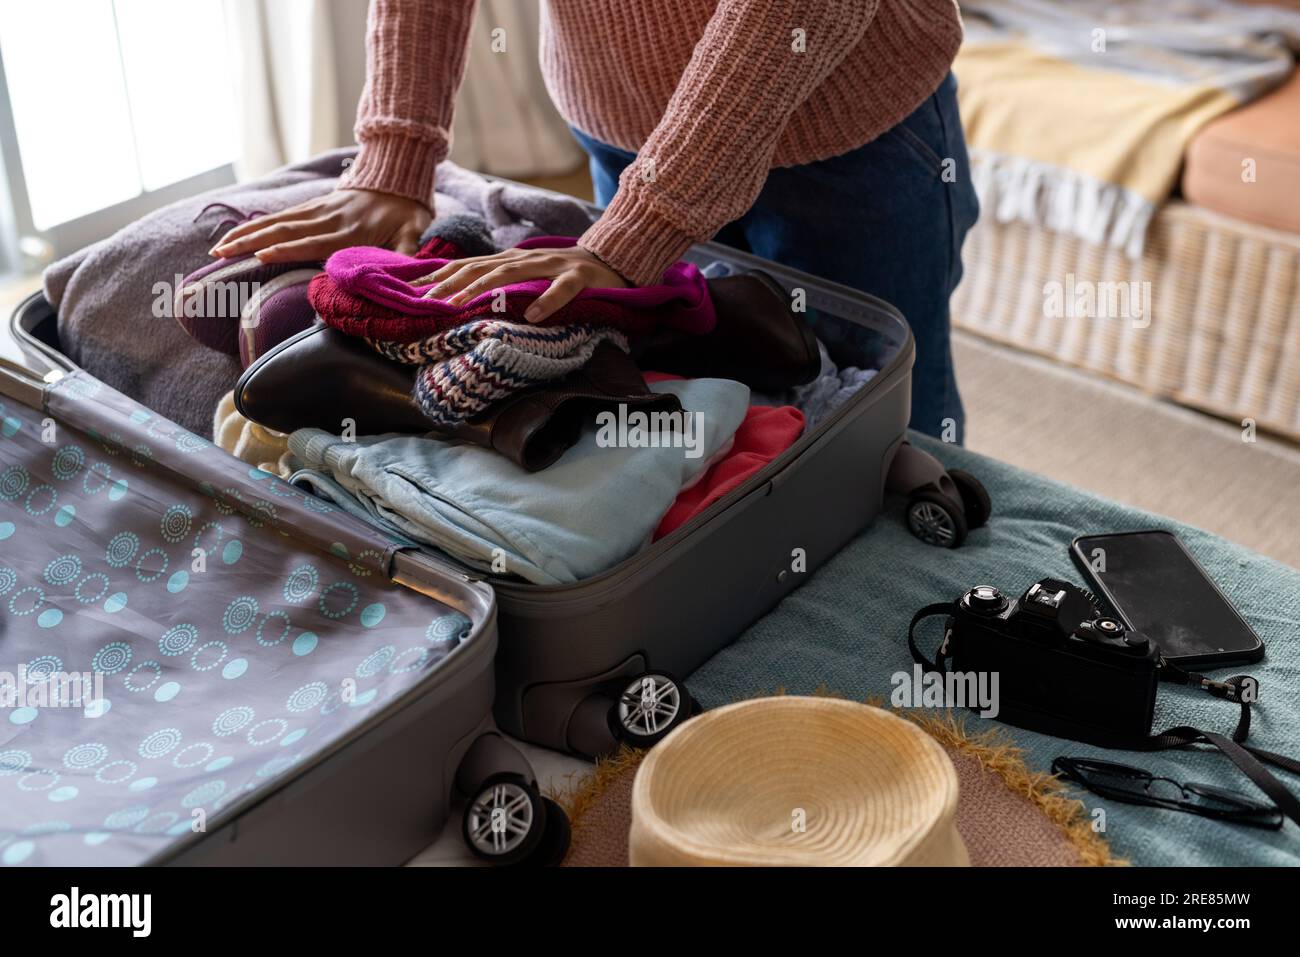 Calm woman packing luggage in bedroom · Free Stock Photo